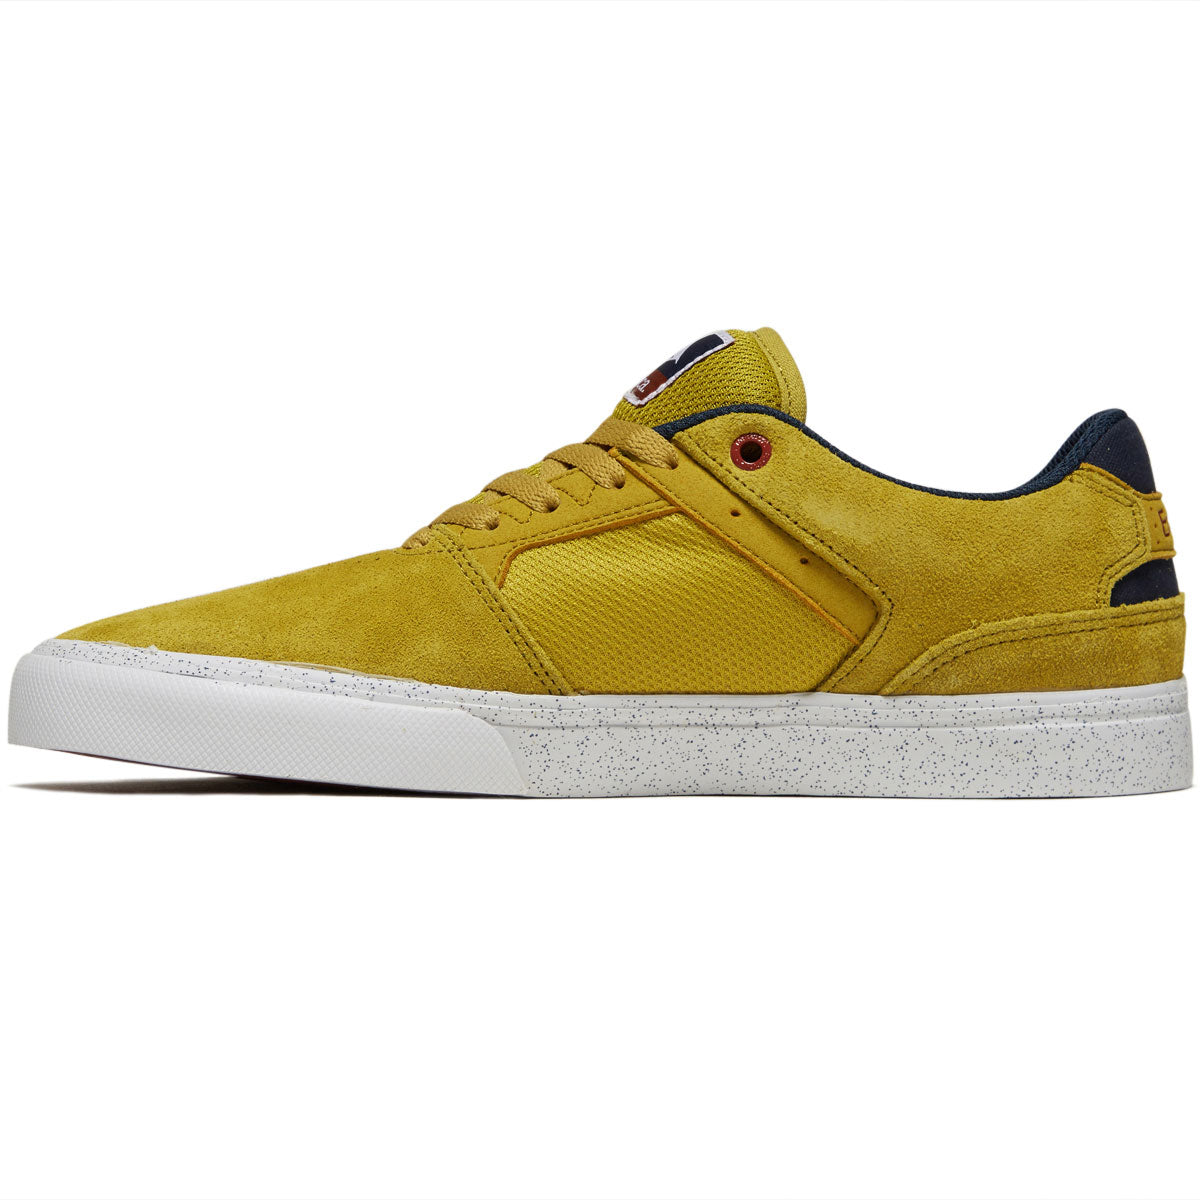 Emerica The Low Vulc Shoes - Gold image 2